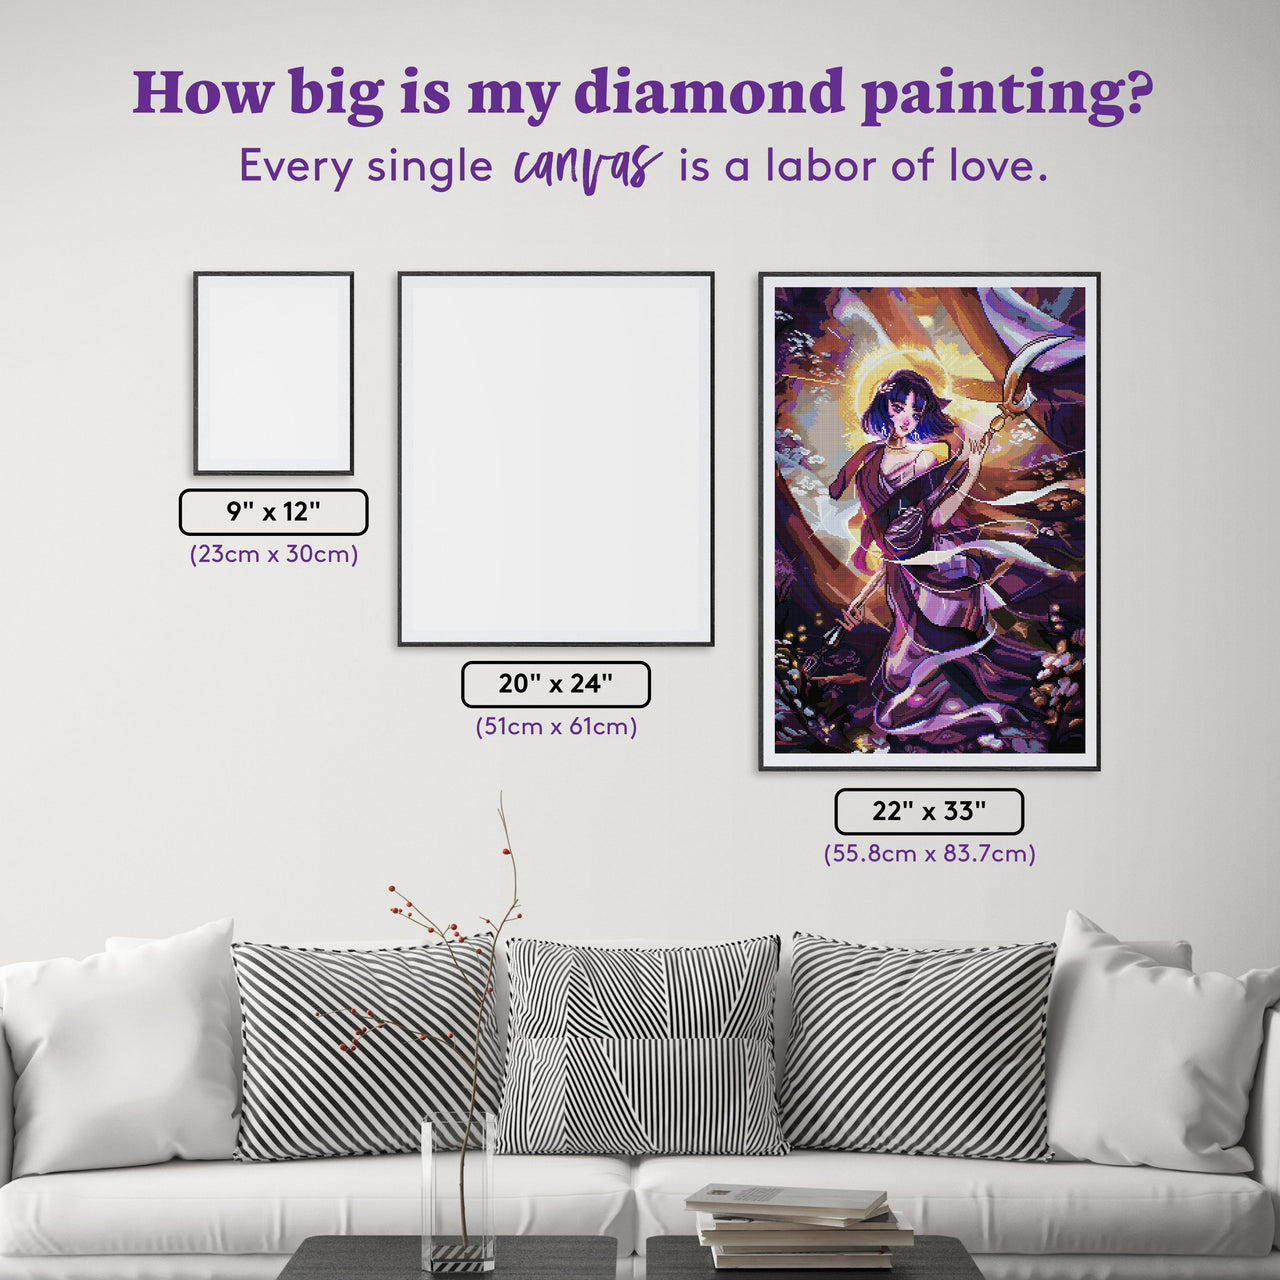 Diamond Painting Saturn 22" x 33" (55.8cm x 83.7cm) / Square with 59 Colors including 3 ABs and 2 Fairy Dust Diamonds / 75,264